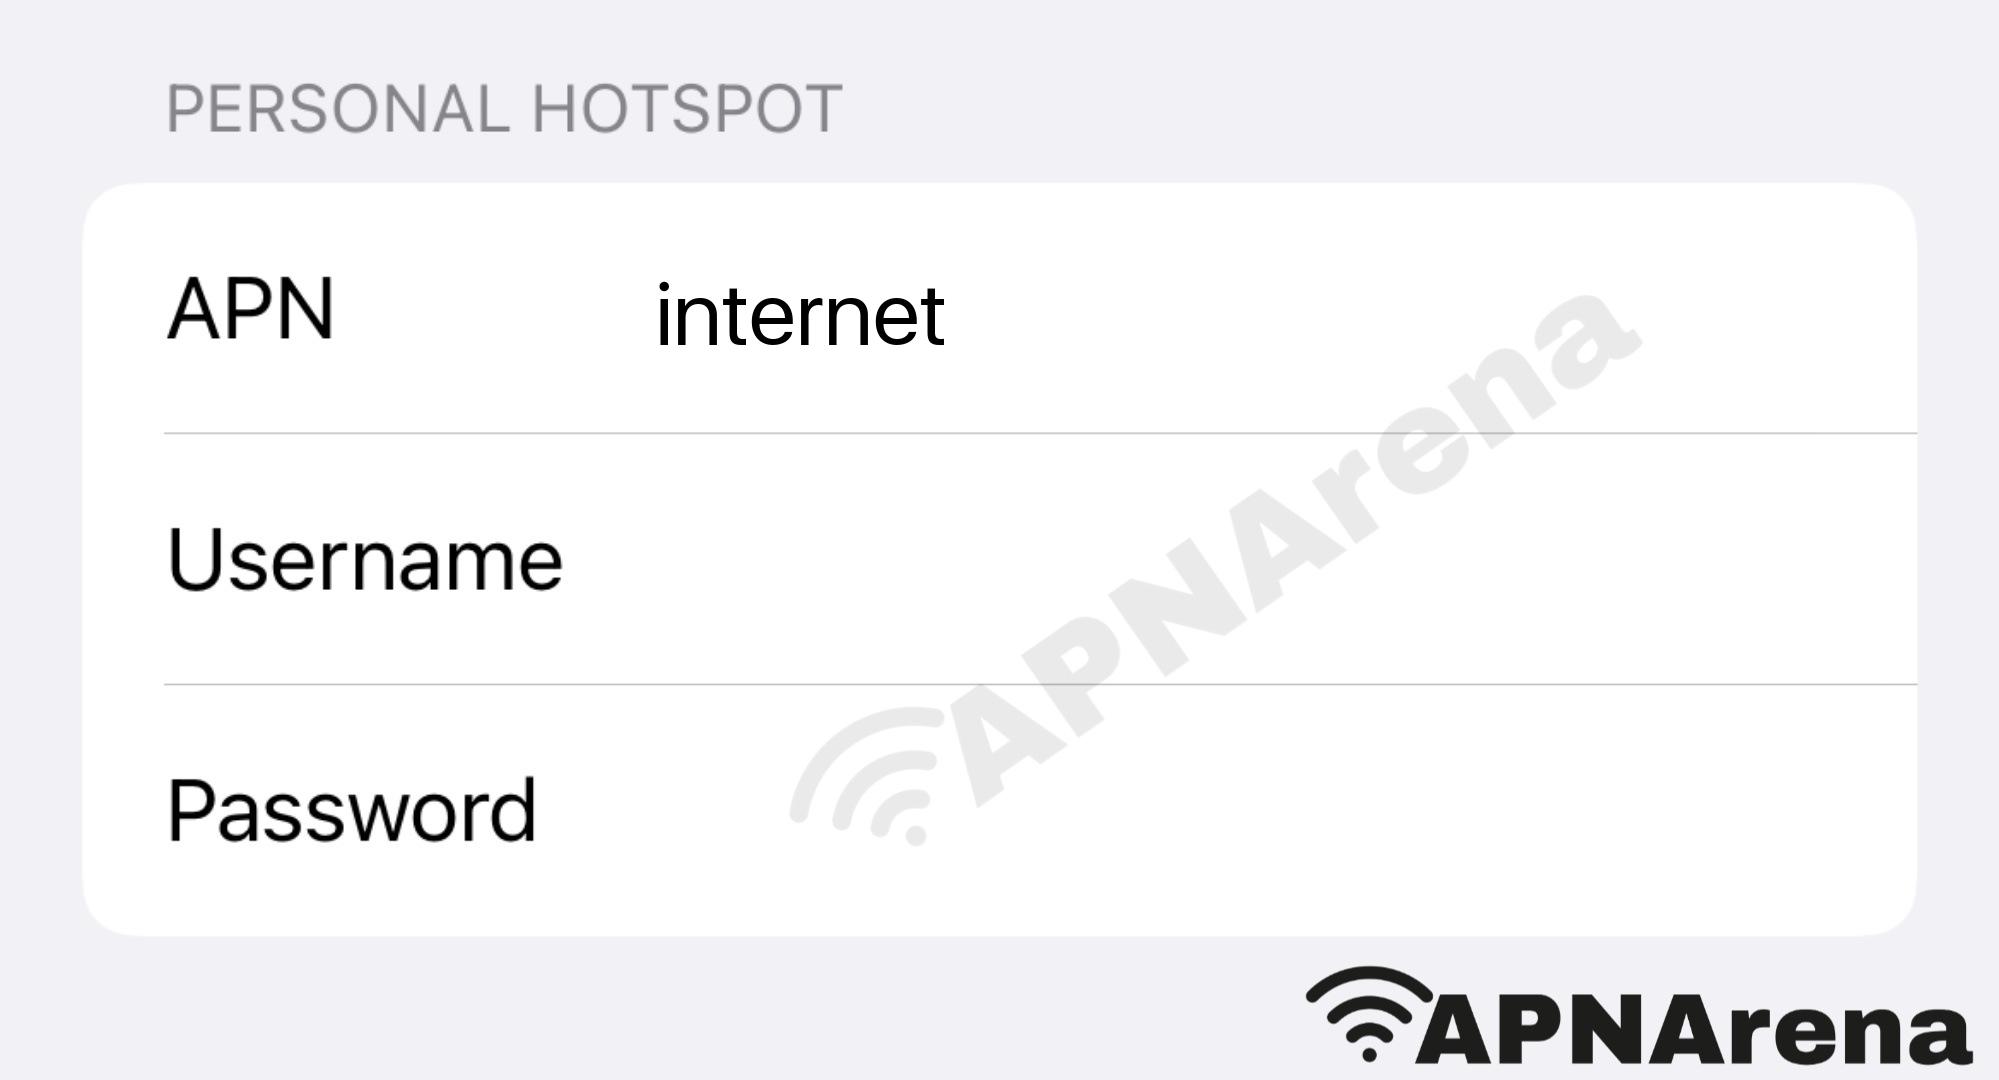 Camtel Personal Hotspot Settings for iPhone